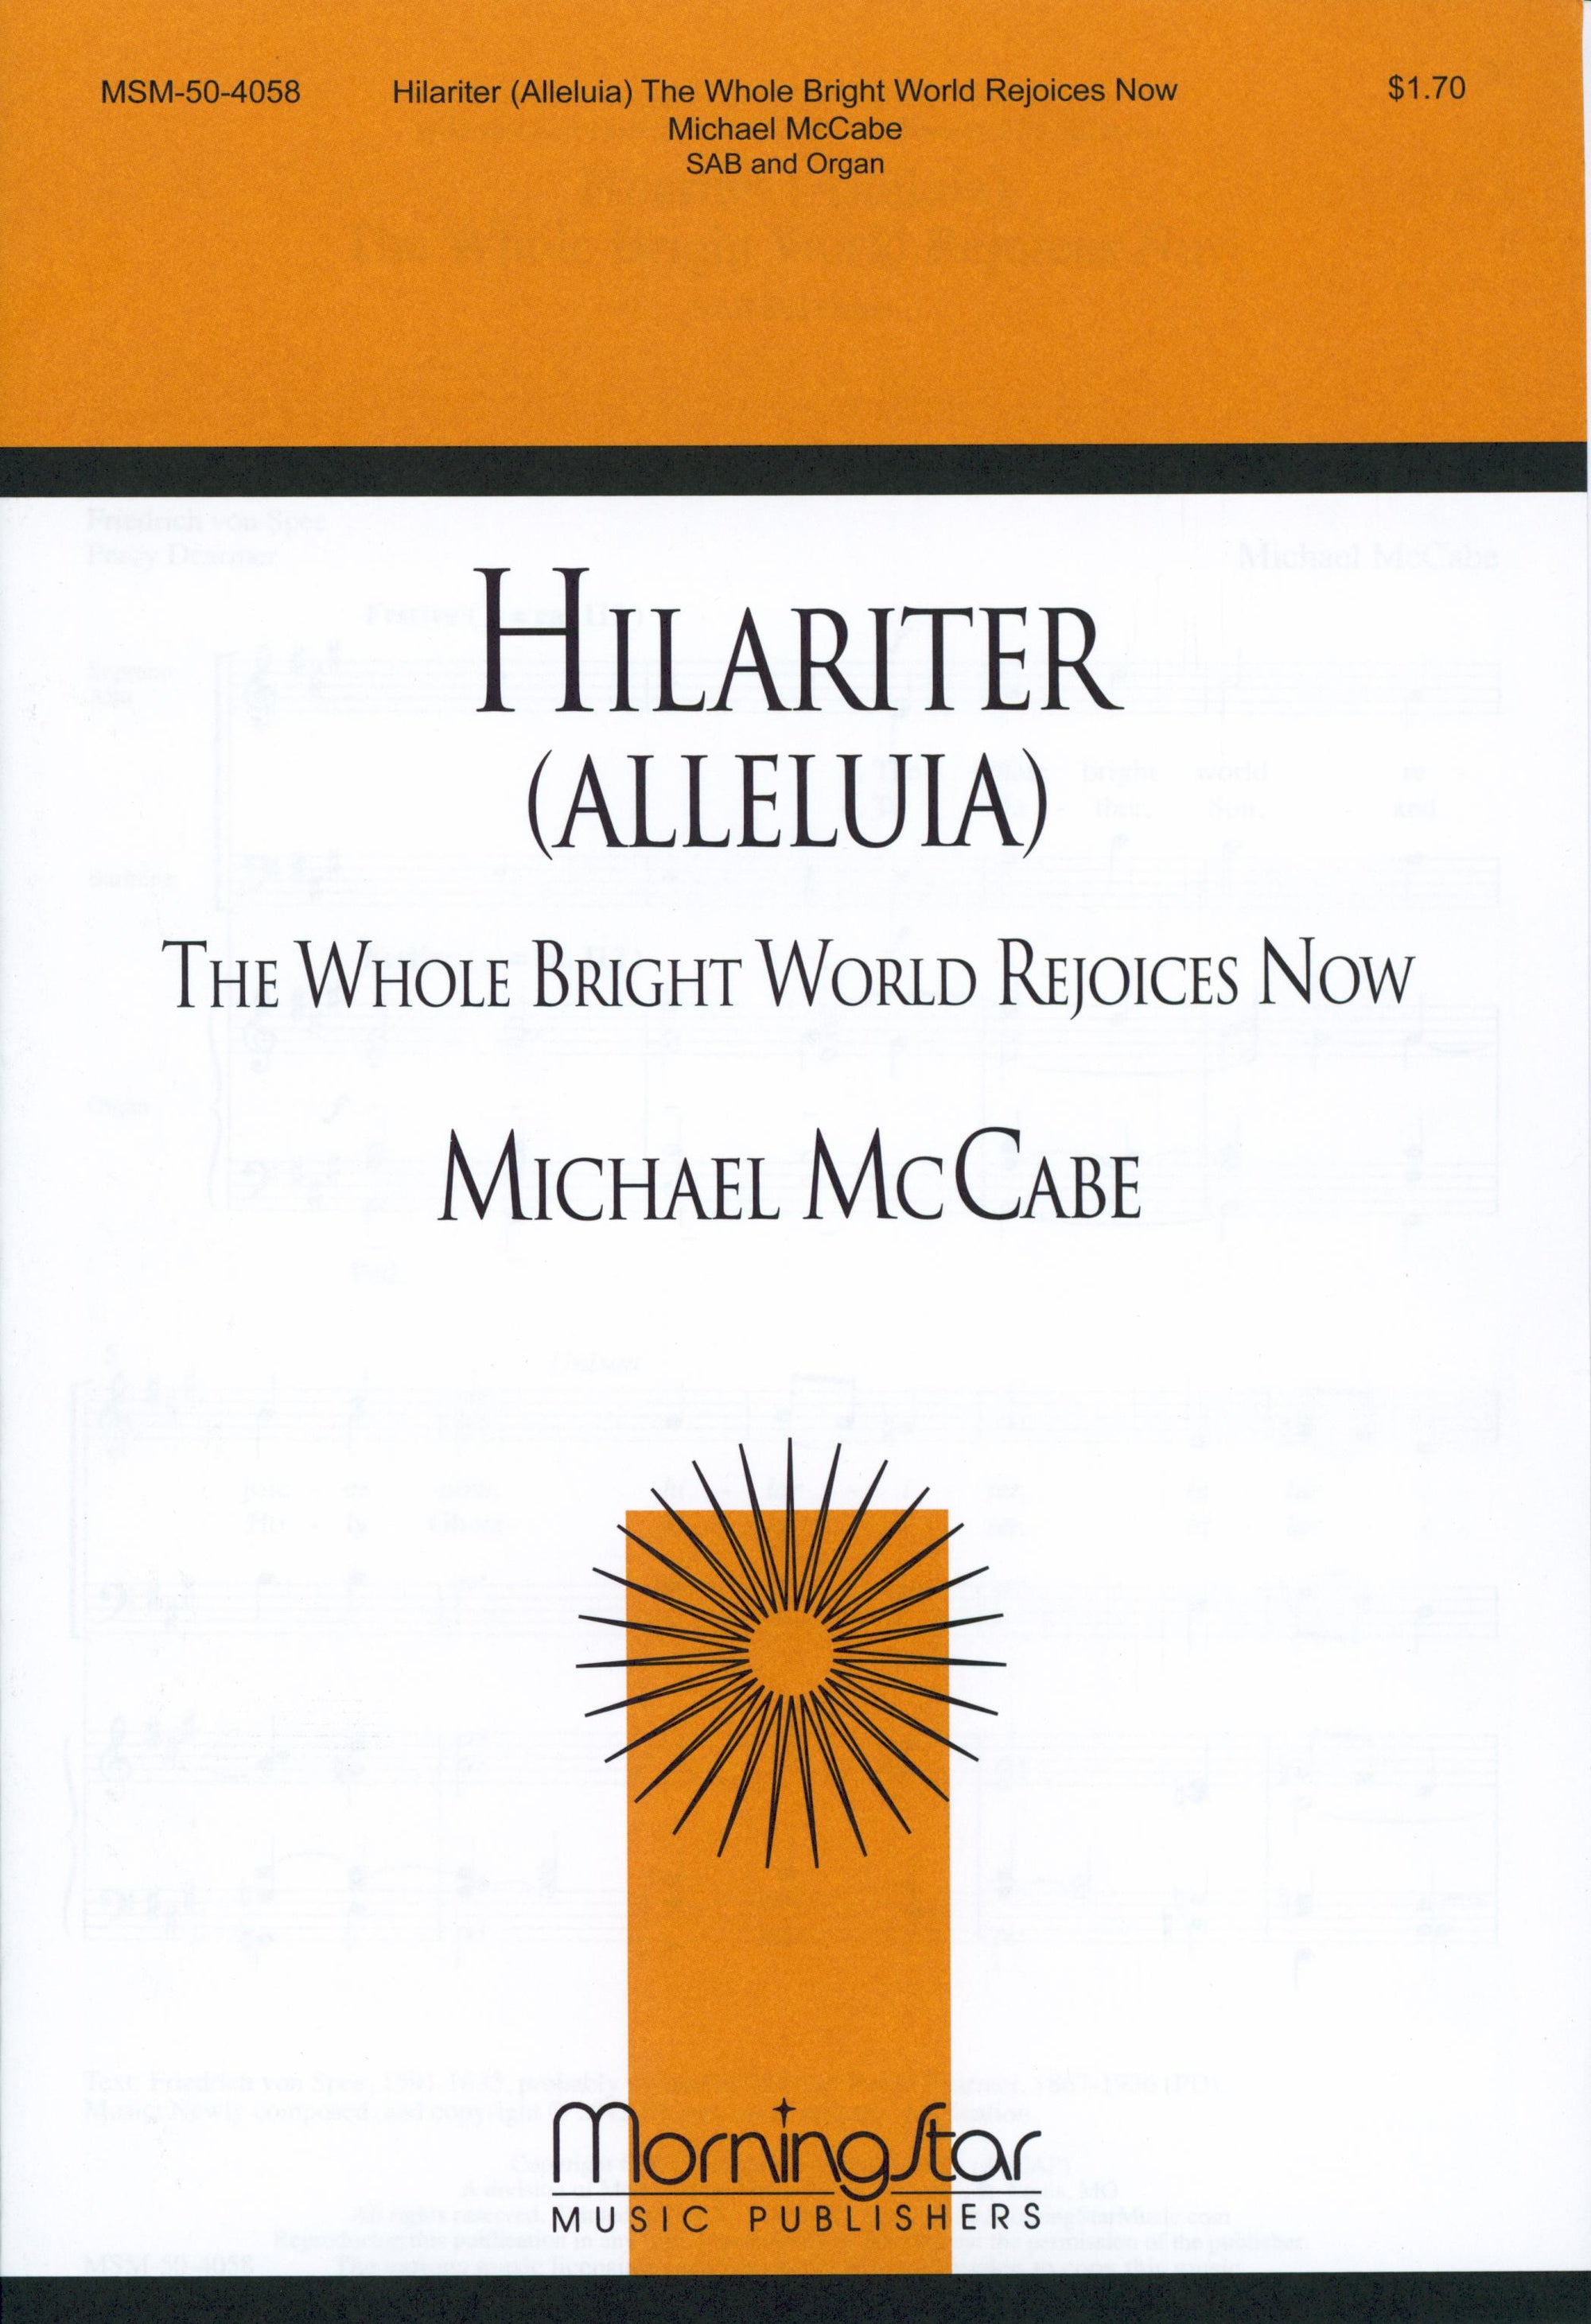 McCabe: Hilariter (Alleluia) - The Whole Bright World Rejoices Now